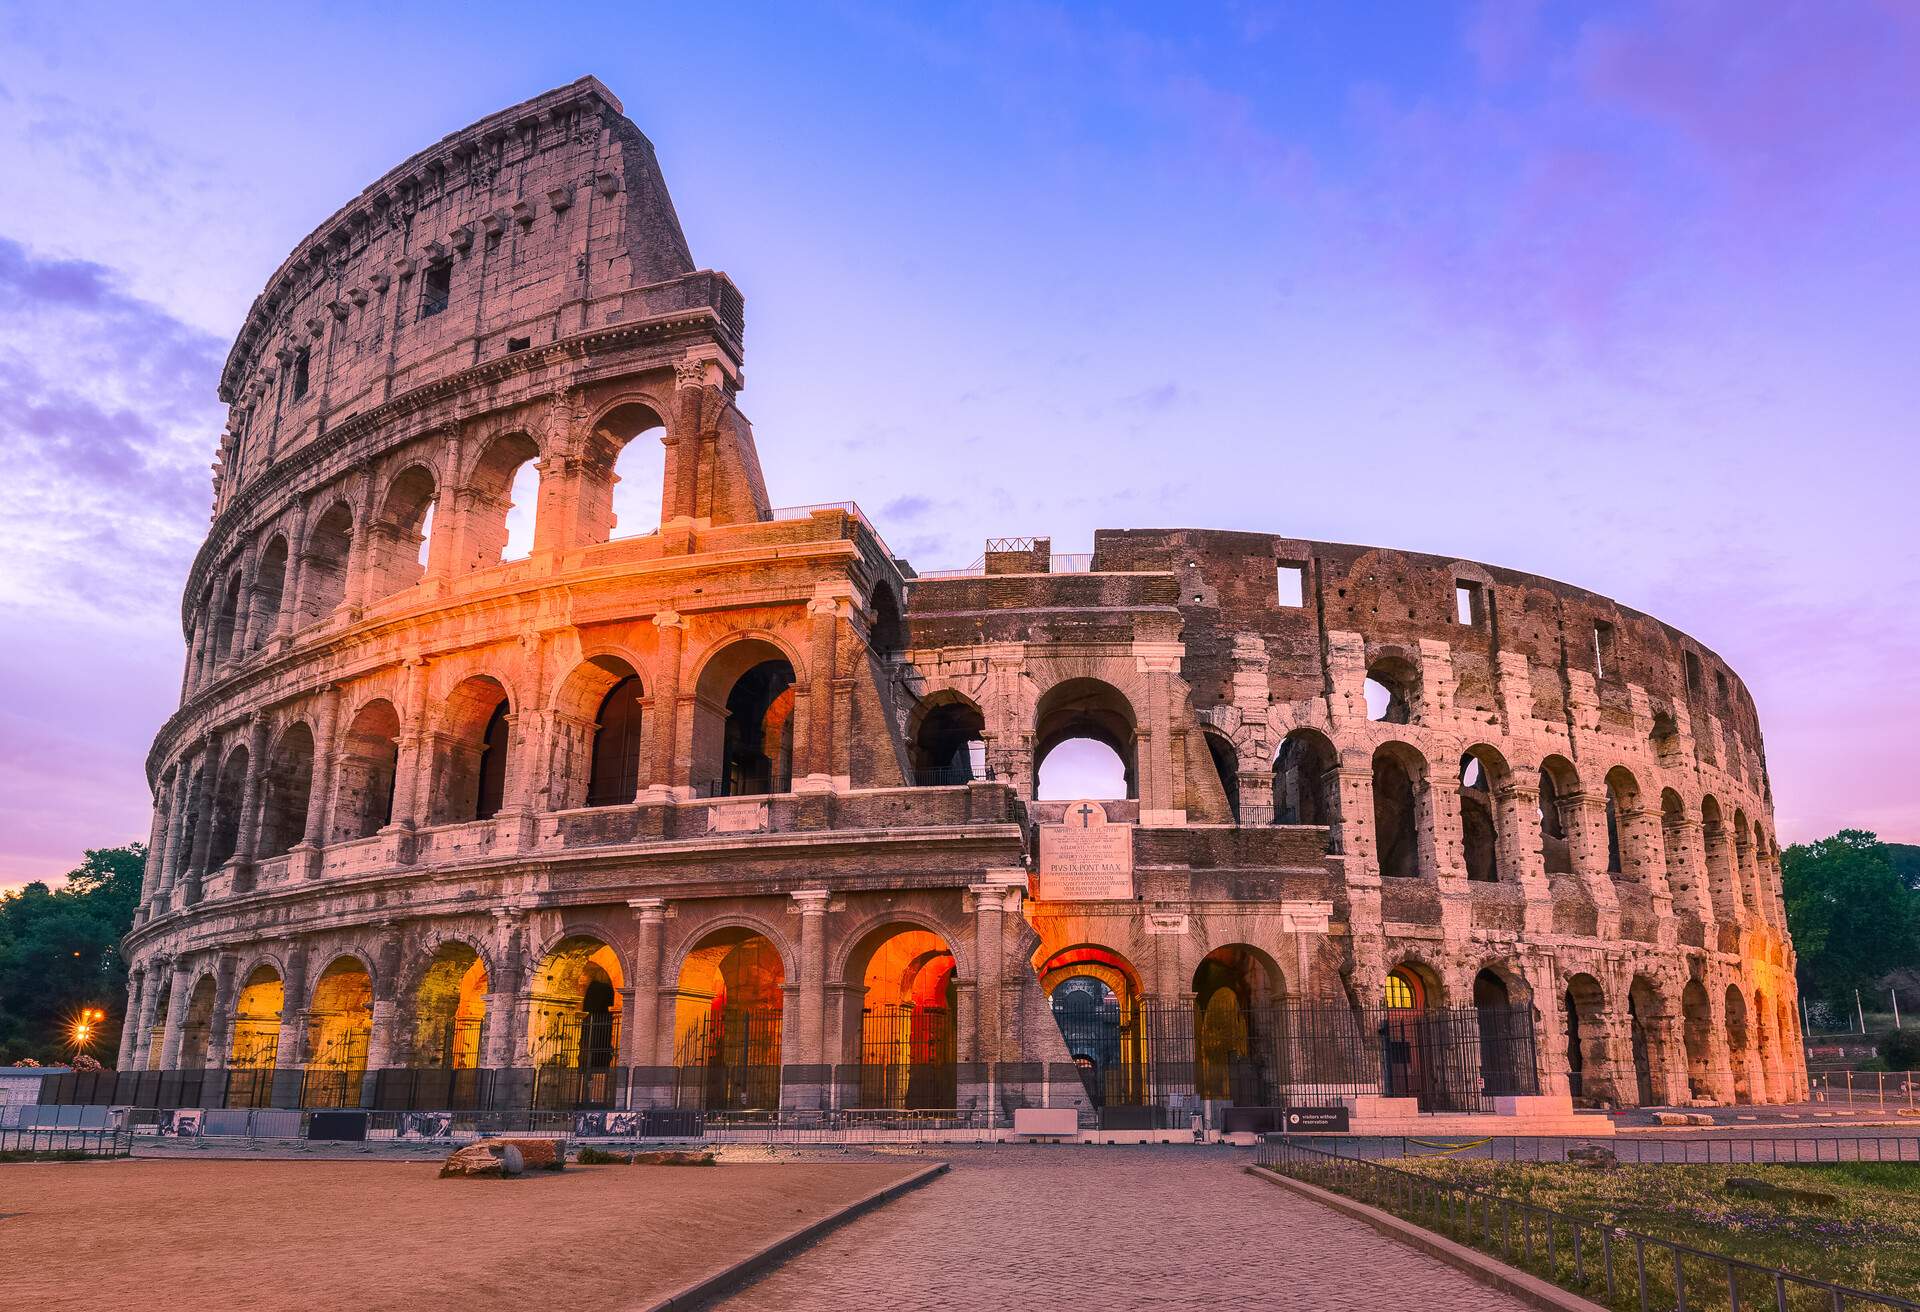 A partially lighted Colosseum against a colourful sky at dusk.